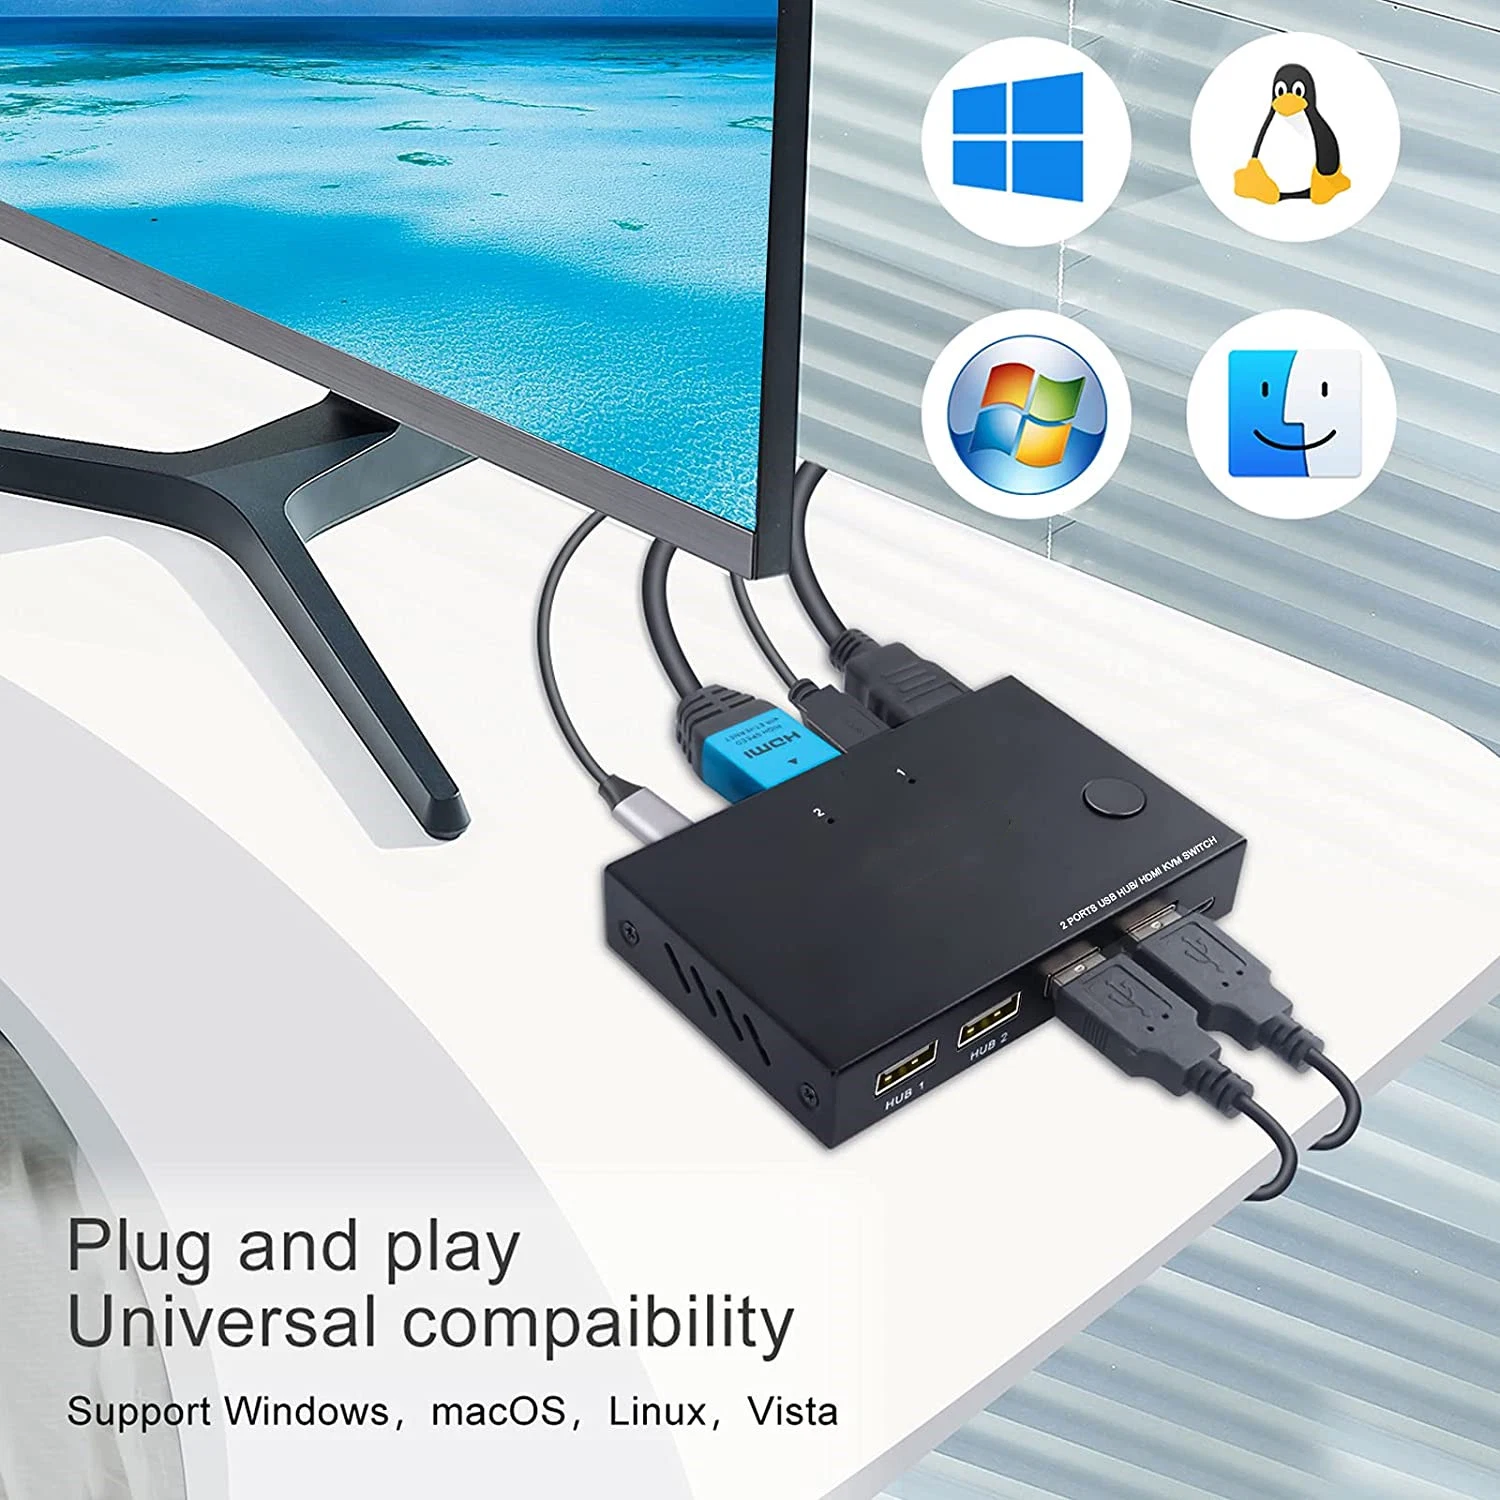 Kvm Switch HDMI 2 Port, USB Switcher Box, UHD 4K@30Hz, 4 USB 2.0 Hubs, Support Wireless Keyboard and Mouse, Compatible Laptop/PC/PS4/xBox/HDTV, with HD